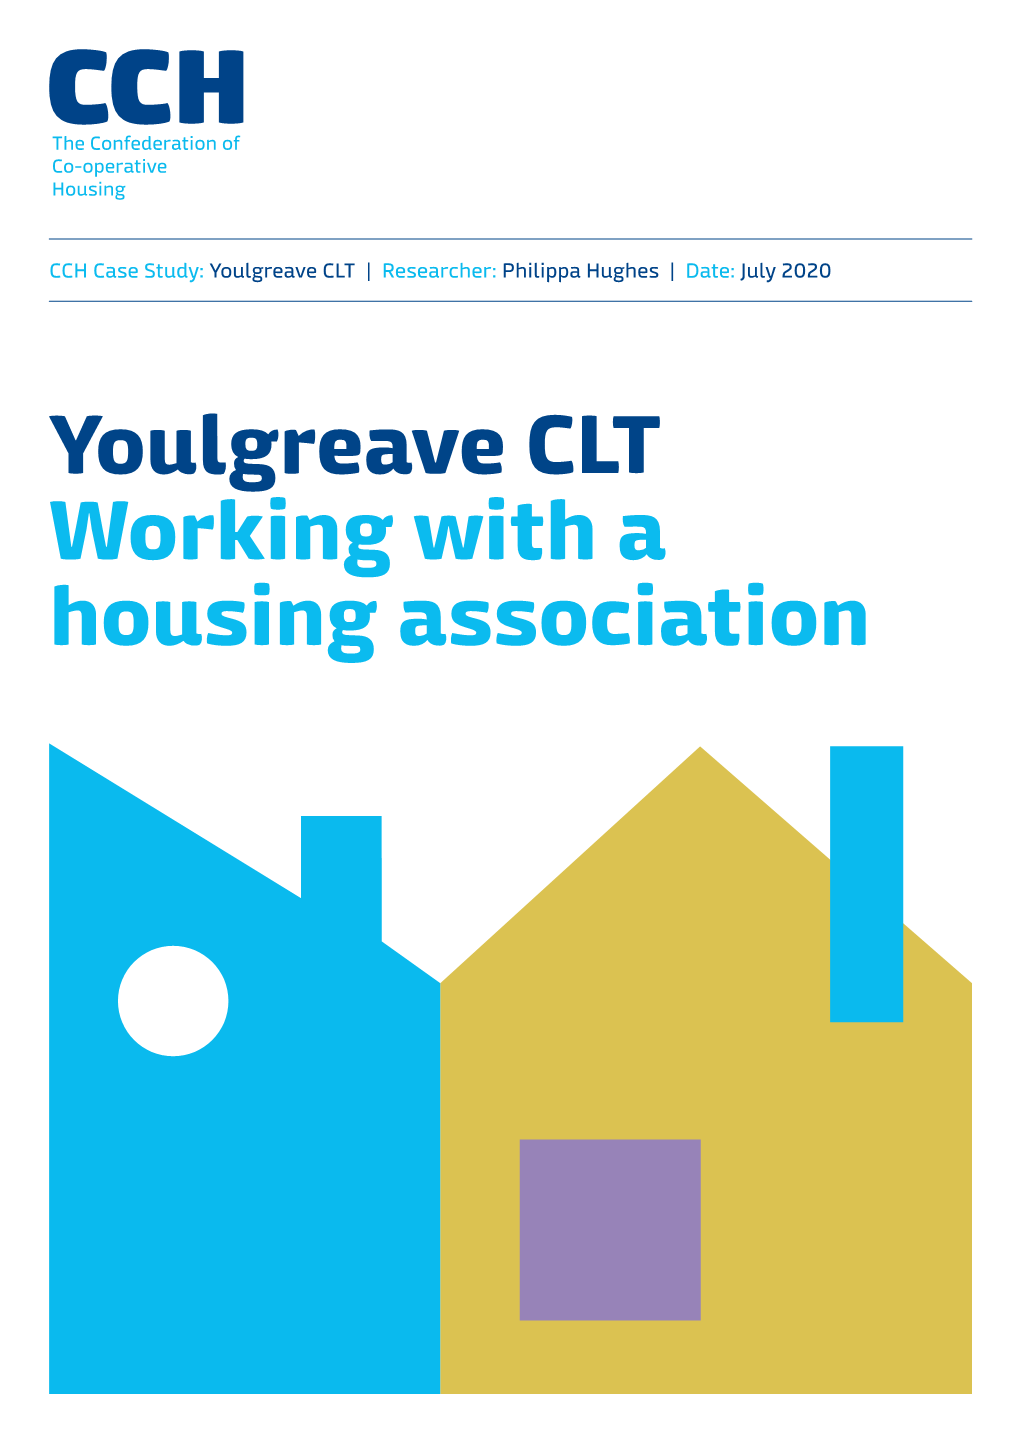 Youlgreave CLT Working with a Housing Association CCH Case Study: Youlgreave CLT